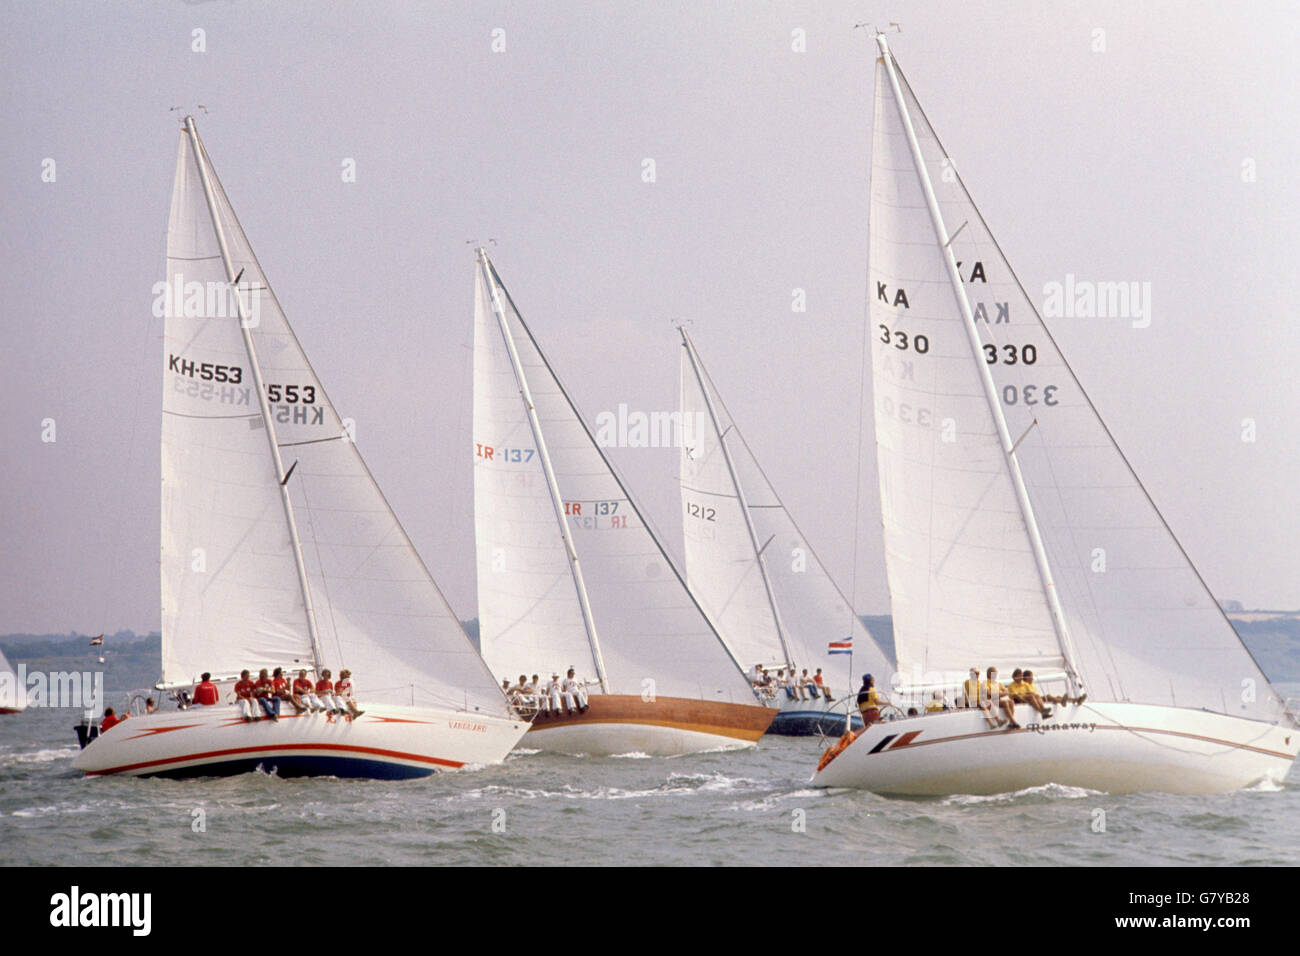 Sailing - Cowes Regatta Week. Yachts in the Solent during Cowes Regatta Week. Stock Photo